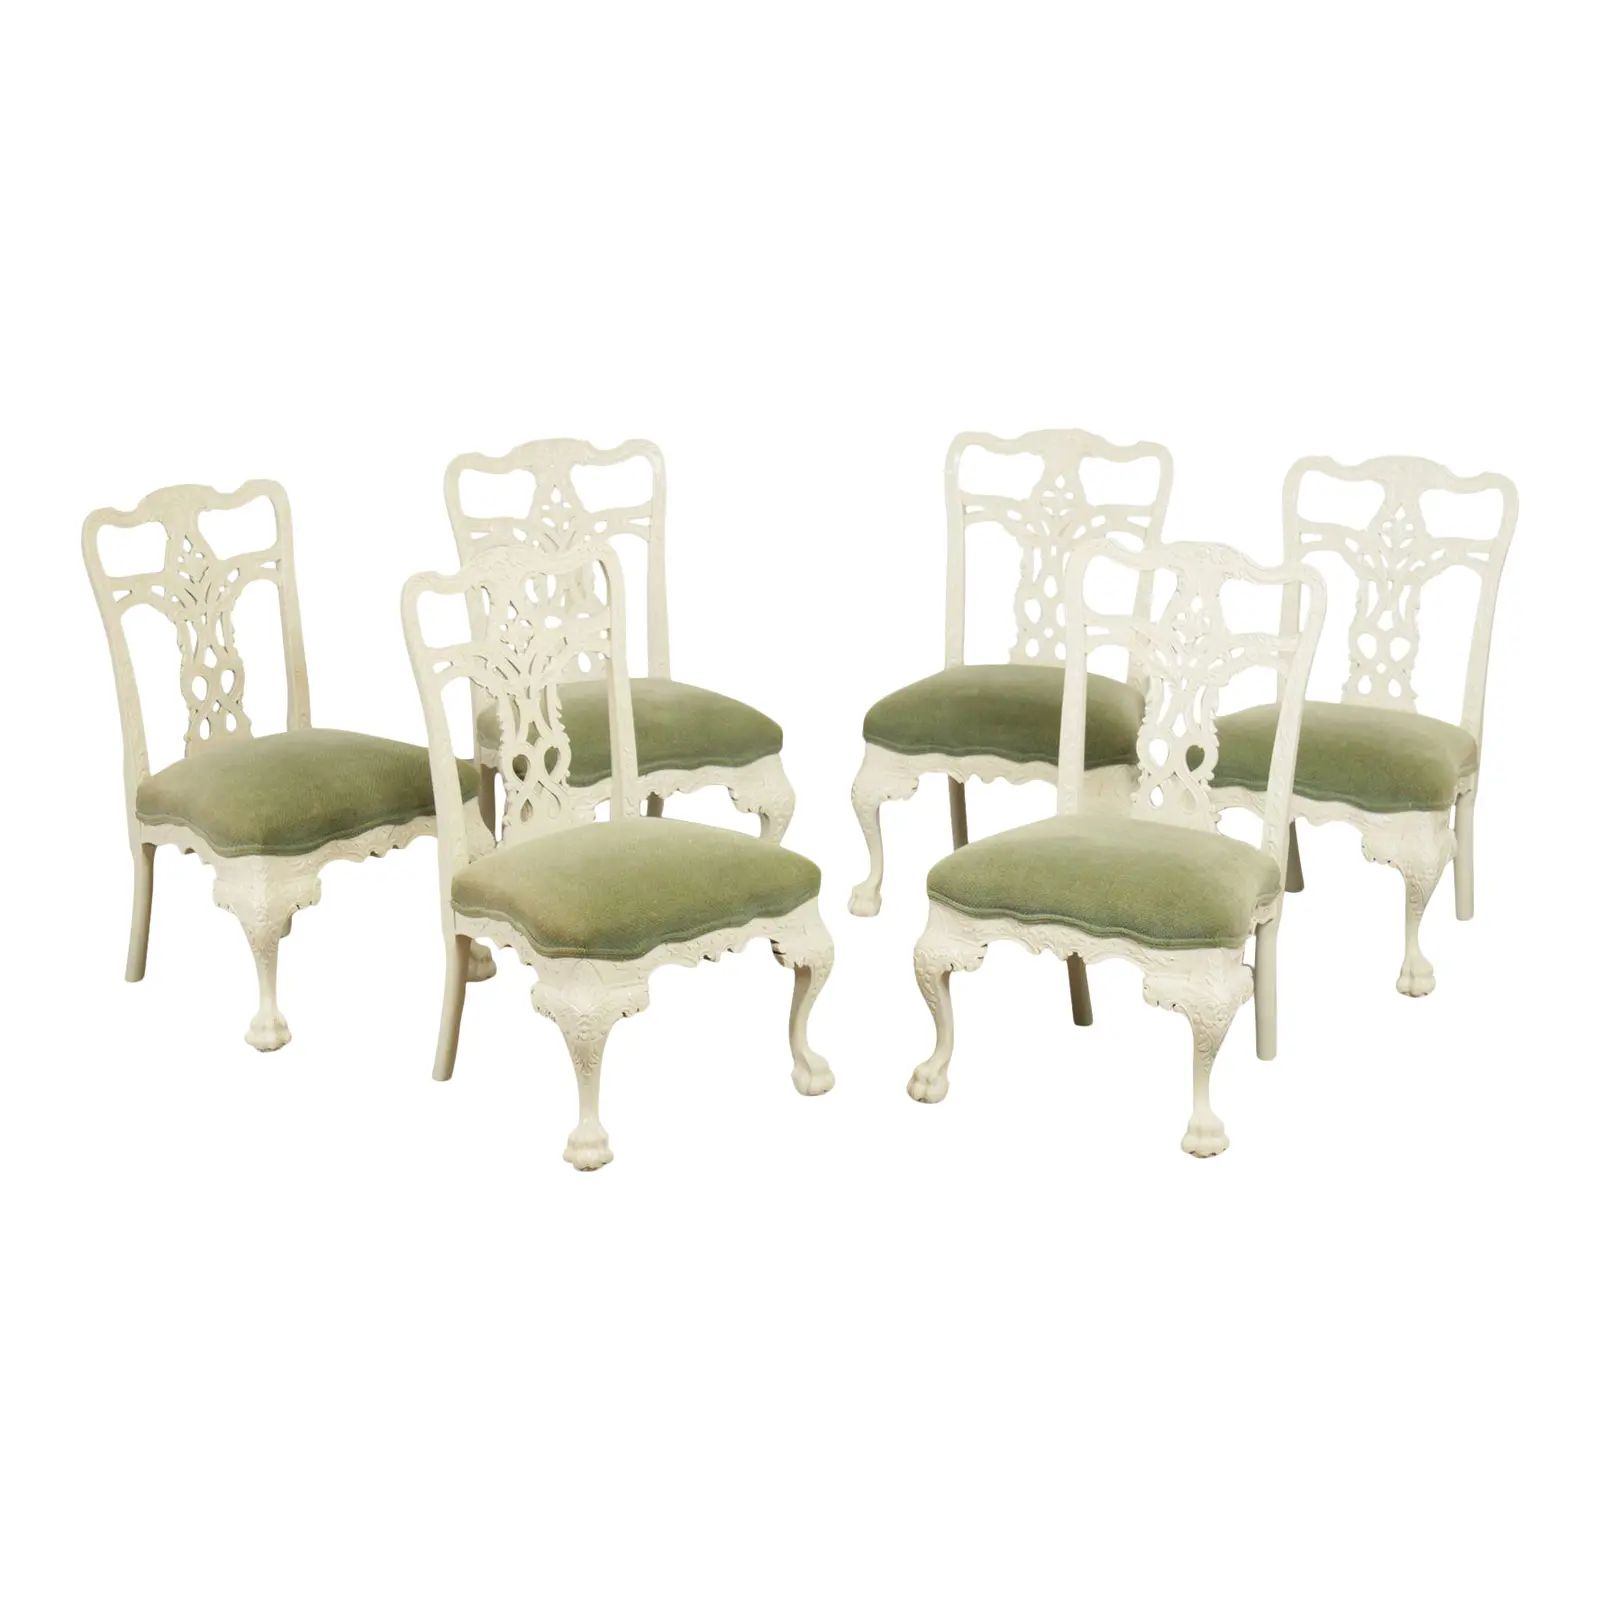 Georgian Style White Lacquered Carved Dining Chairs - Set of 6 | Chairish